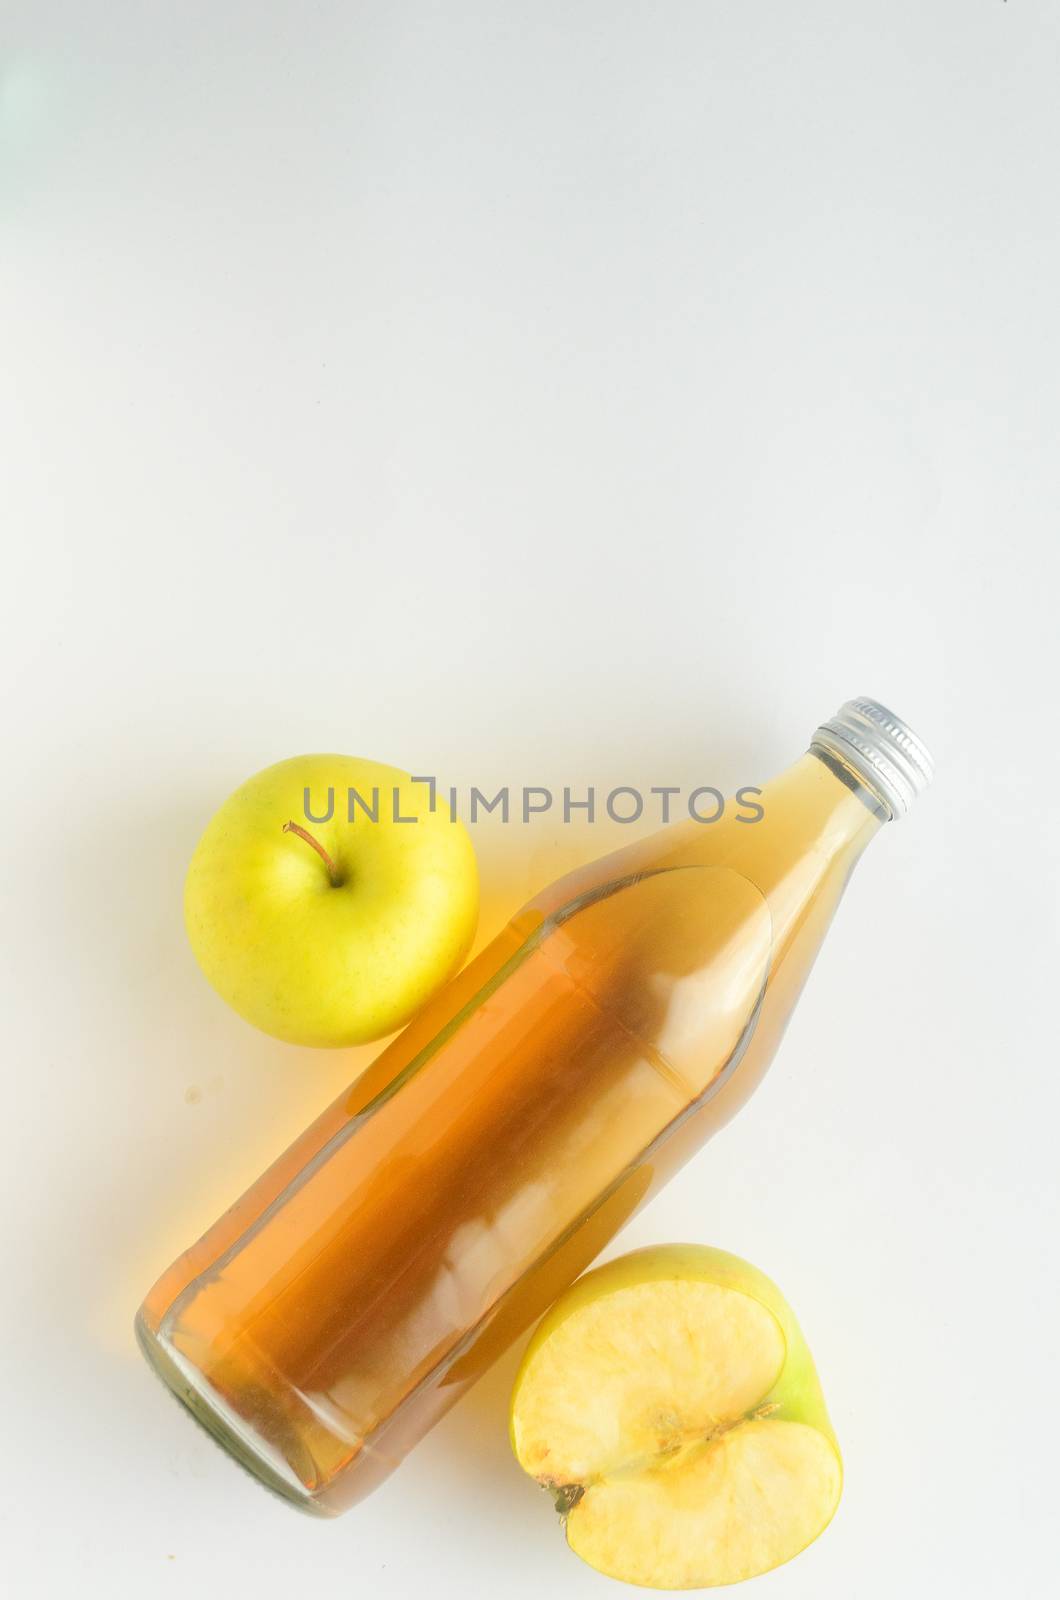 Top view, a bottle of apple cider vinegar and green apples on white background